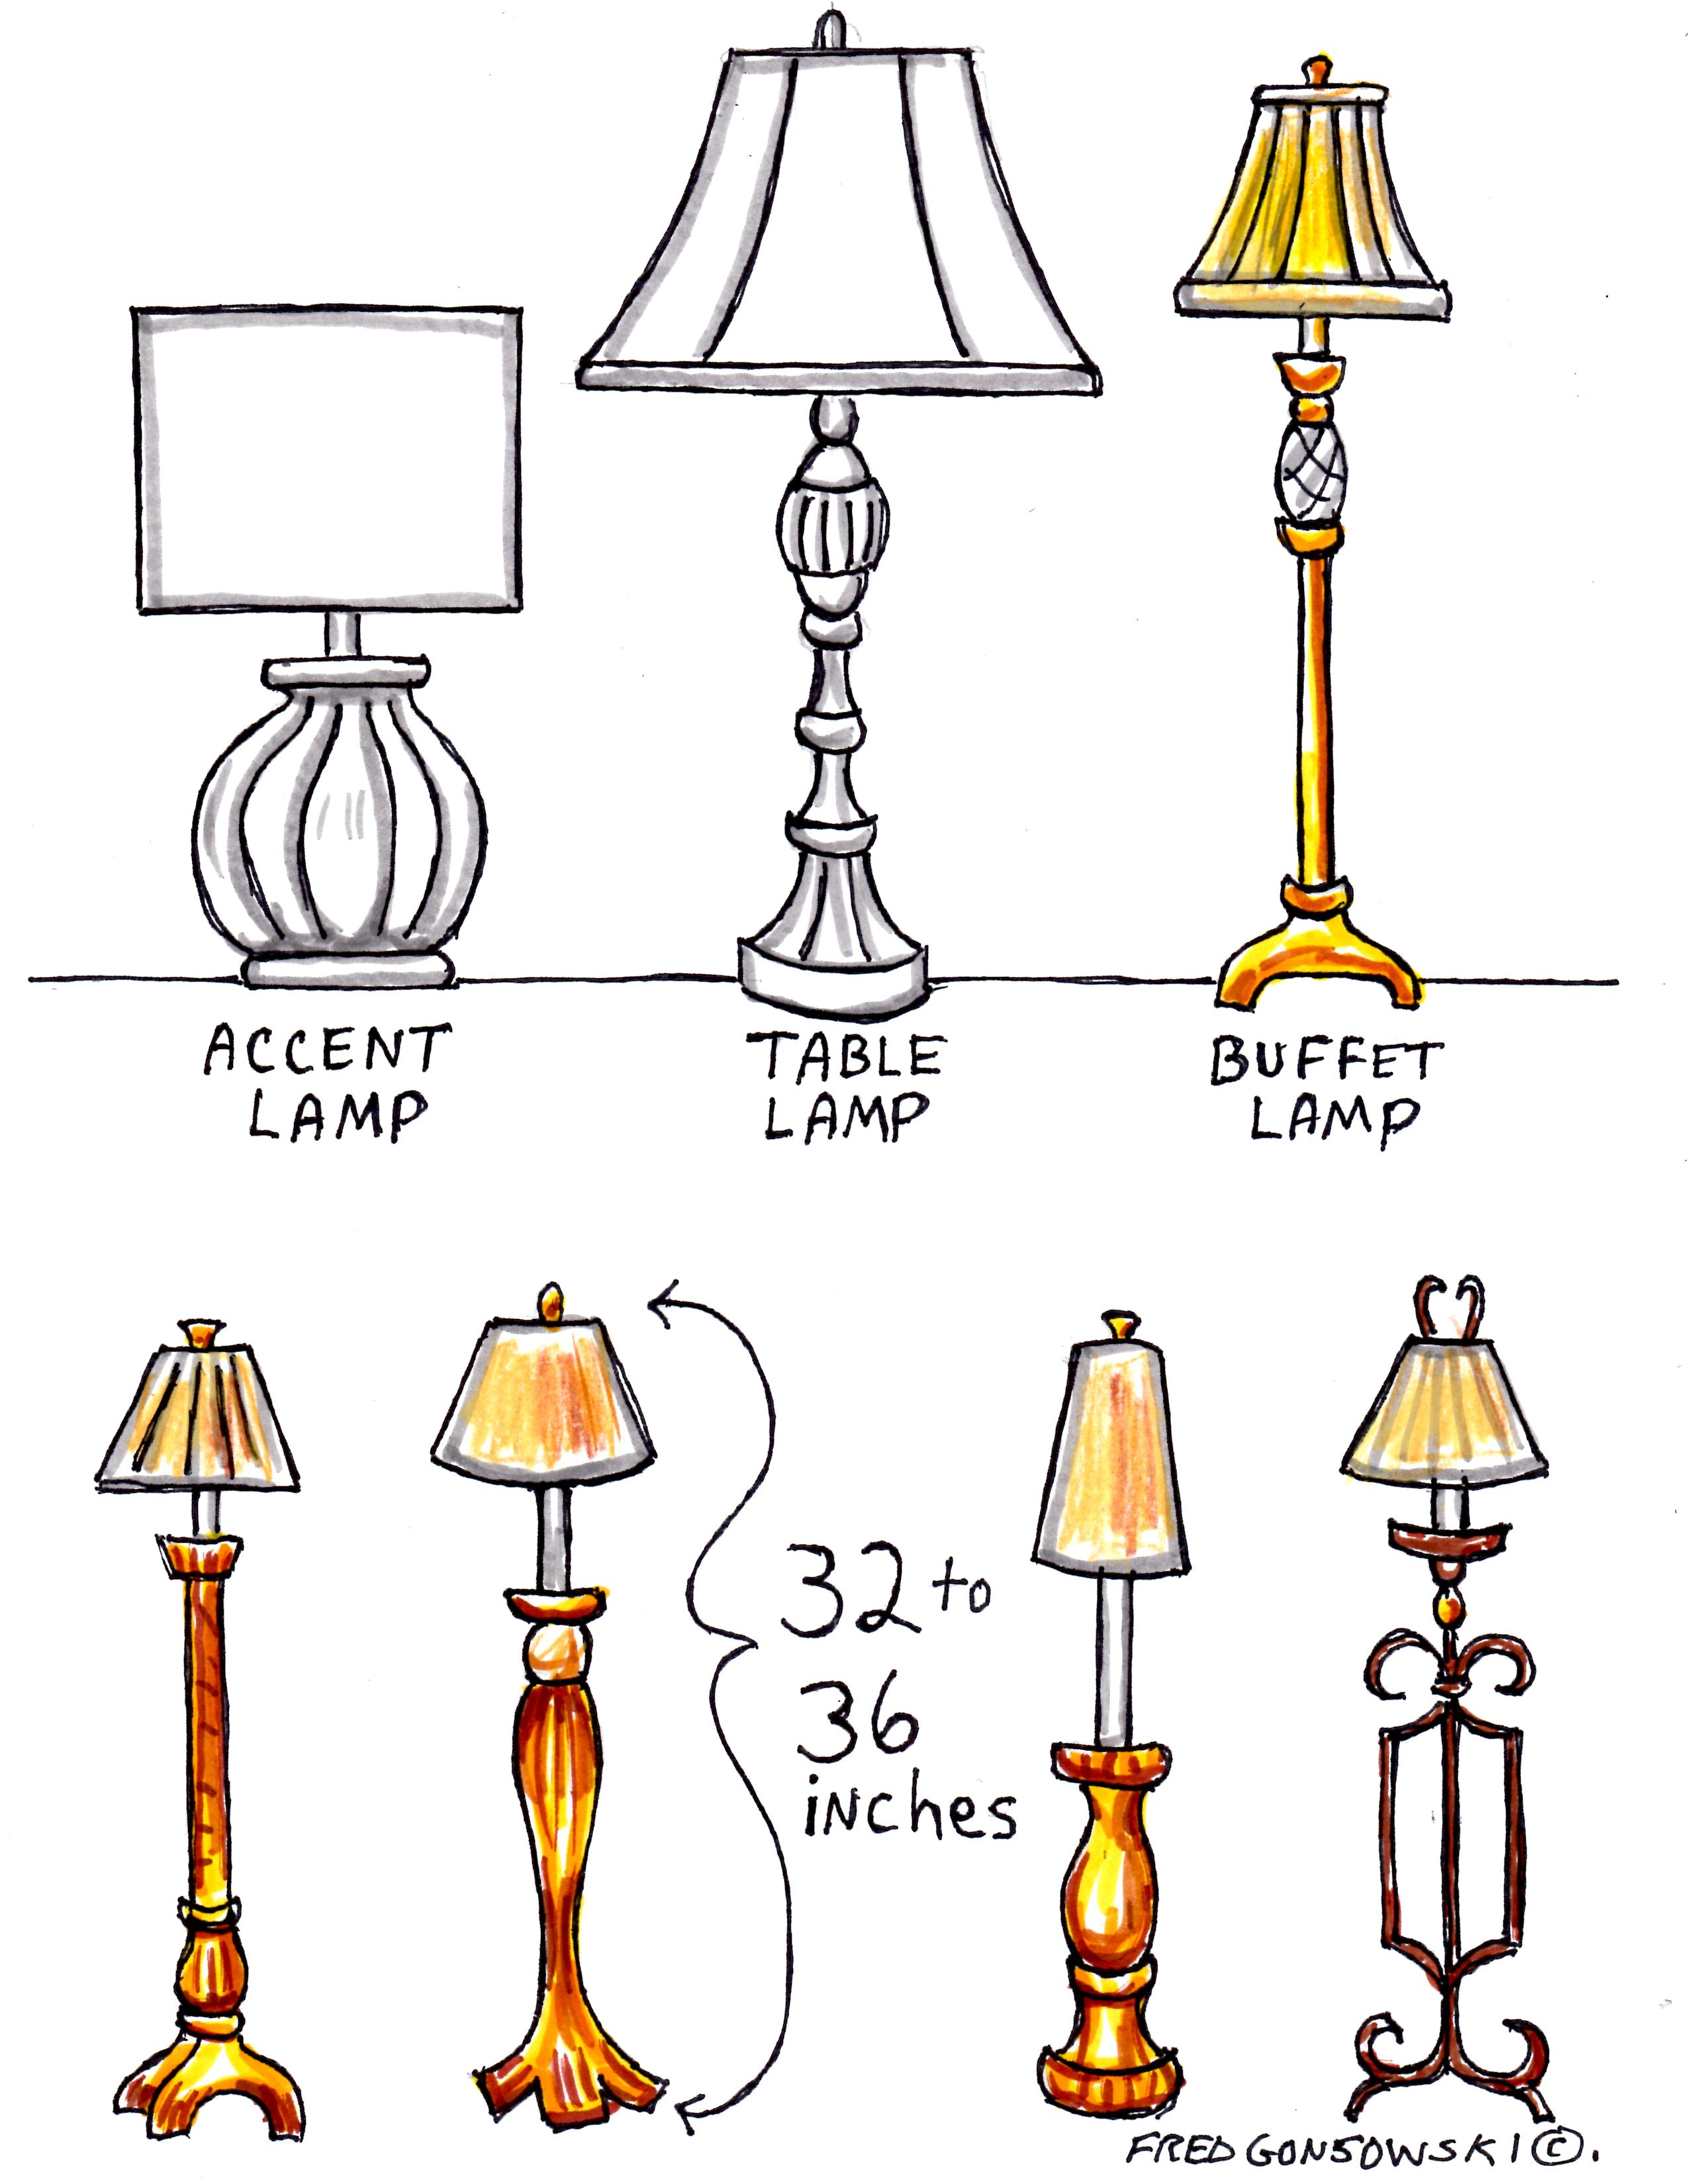 Interior Decorating With Buffet Lamps Fred Gonsowski intended for dimensions 2550 X 3300